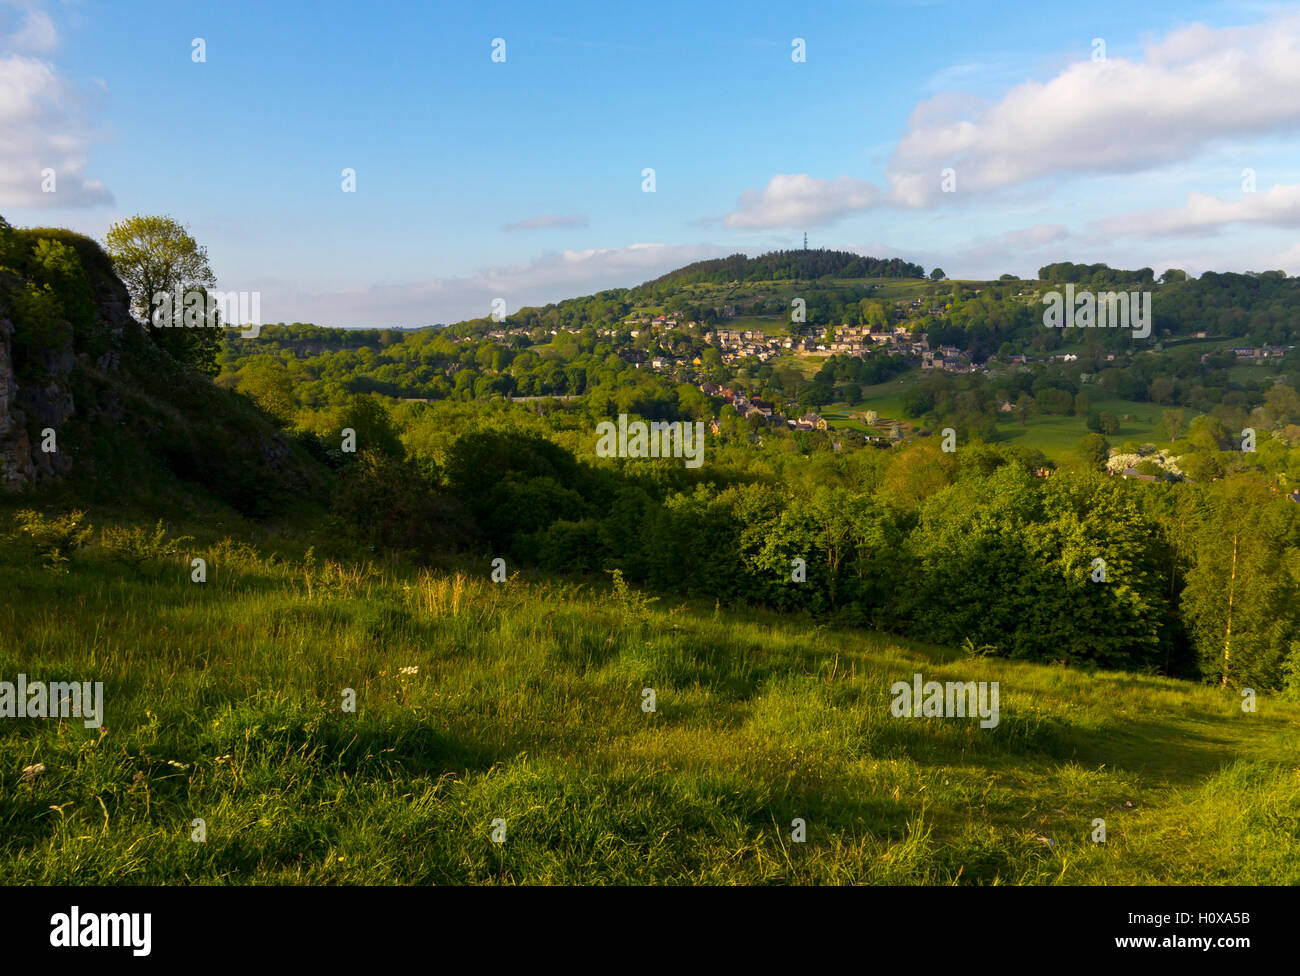 Countryside looking towards Bolehill and Black Rocks near Wirksworth in the Derbyshire Dales Peak District England UK Stock Photo